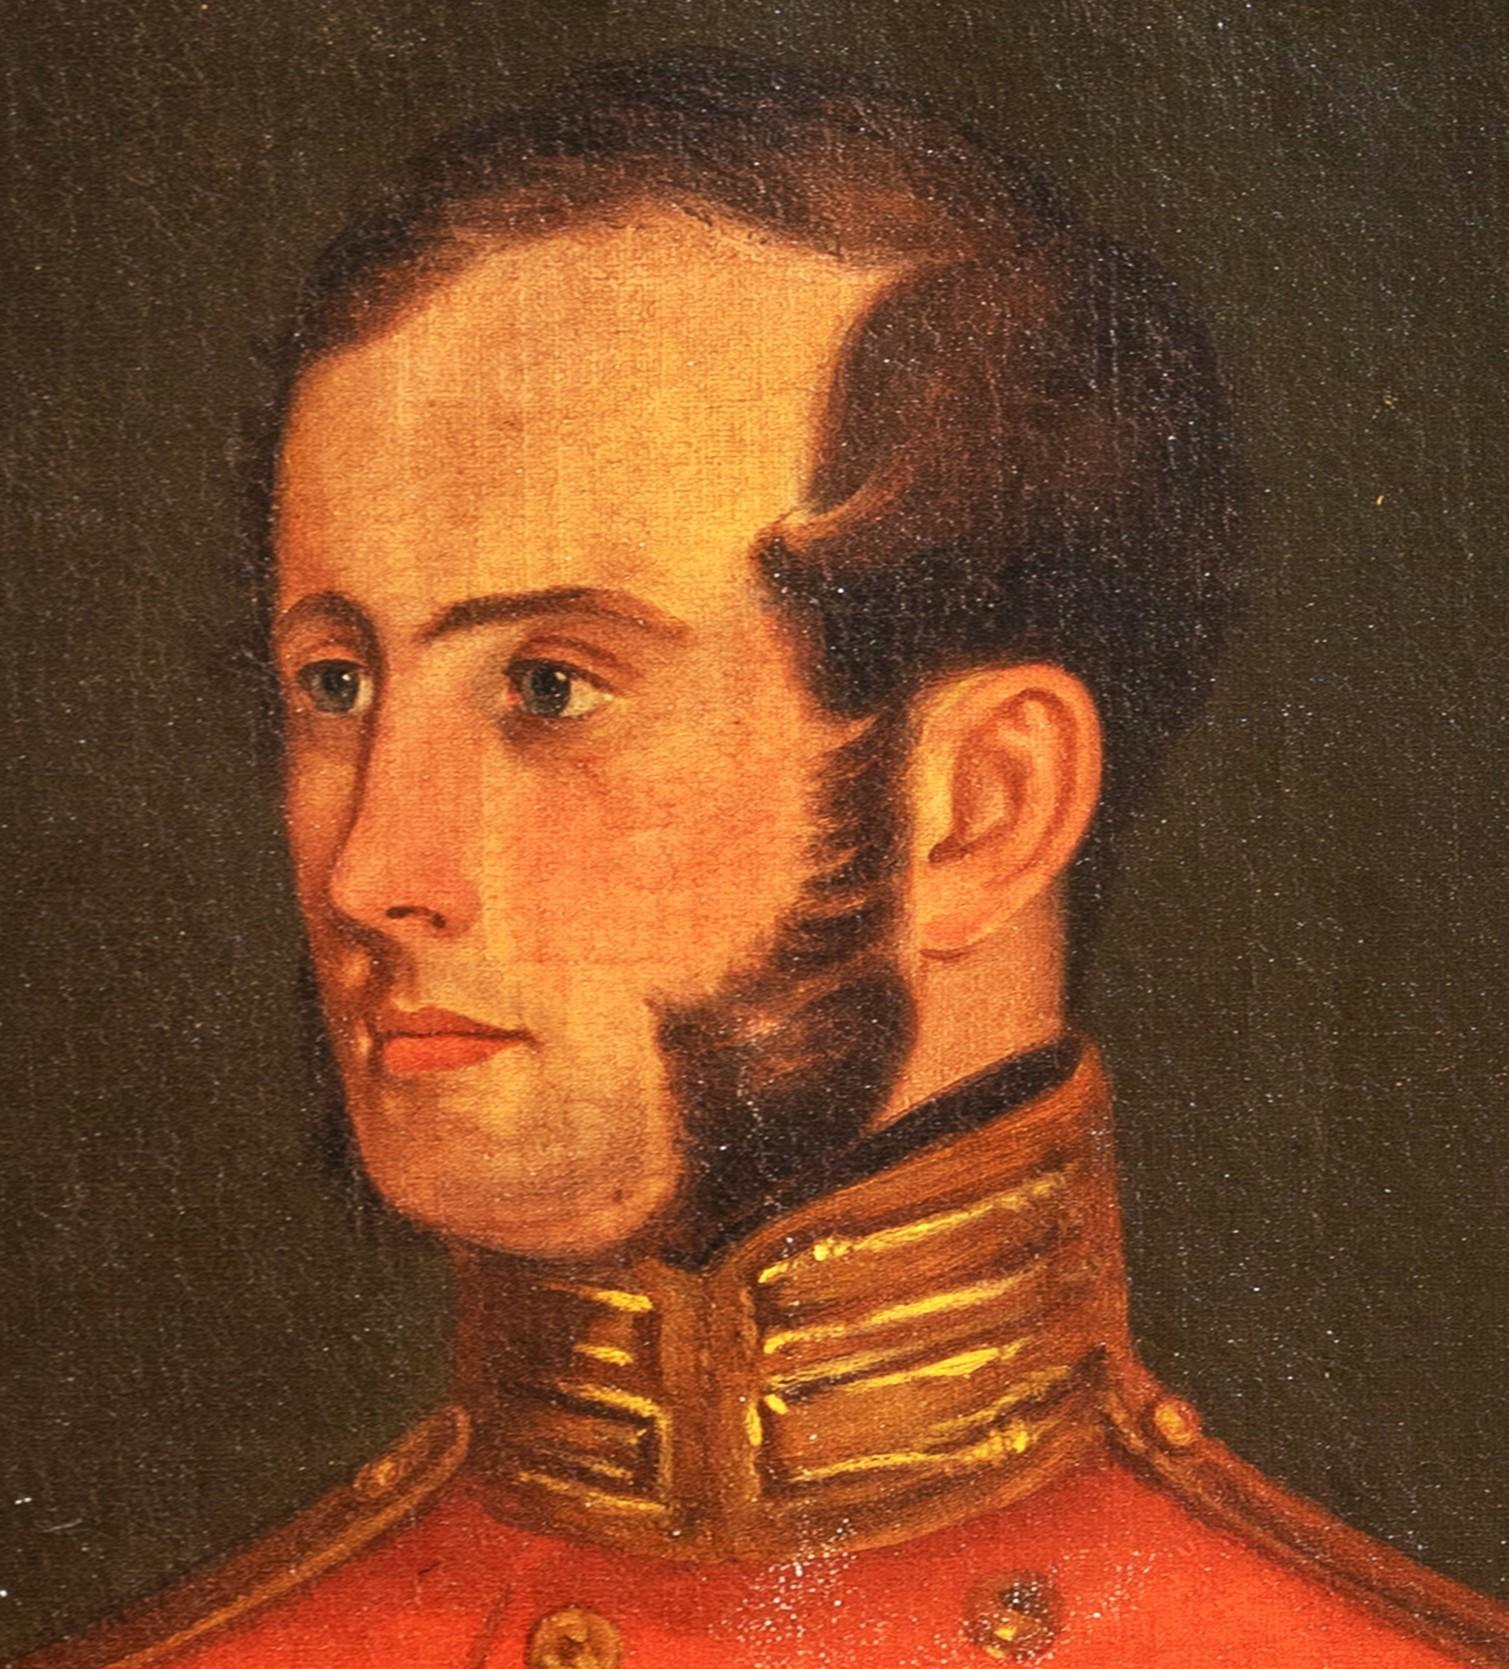 Portrait Of A British Officer, early 19th Century

Napoleonic wars Era

Early 19th Century Napoleonic Wars Era portrait of a British military officer, oil on canvas. Excellent quality and condition portrait of the officer in his red tunic at bust